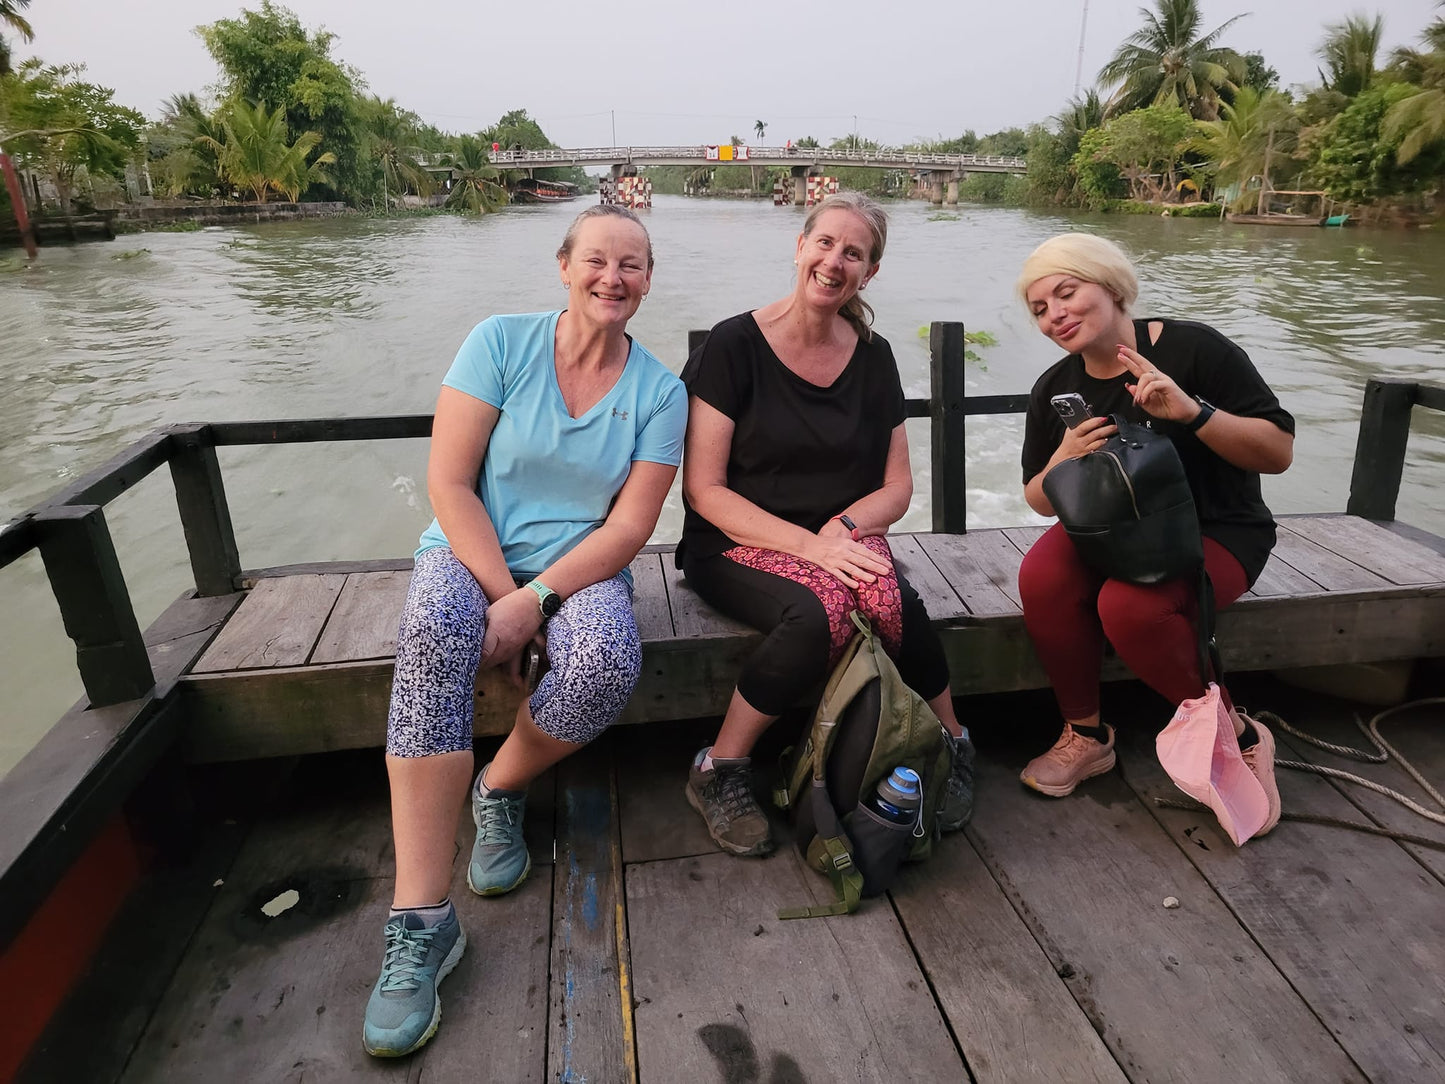 35B: (2 DAYS) Mekong Delta: Pottery Village, Floating Markets, Can Tho, Islands and Boat Tour!